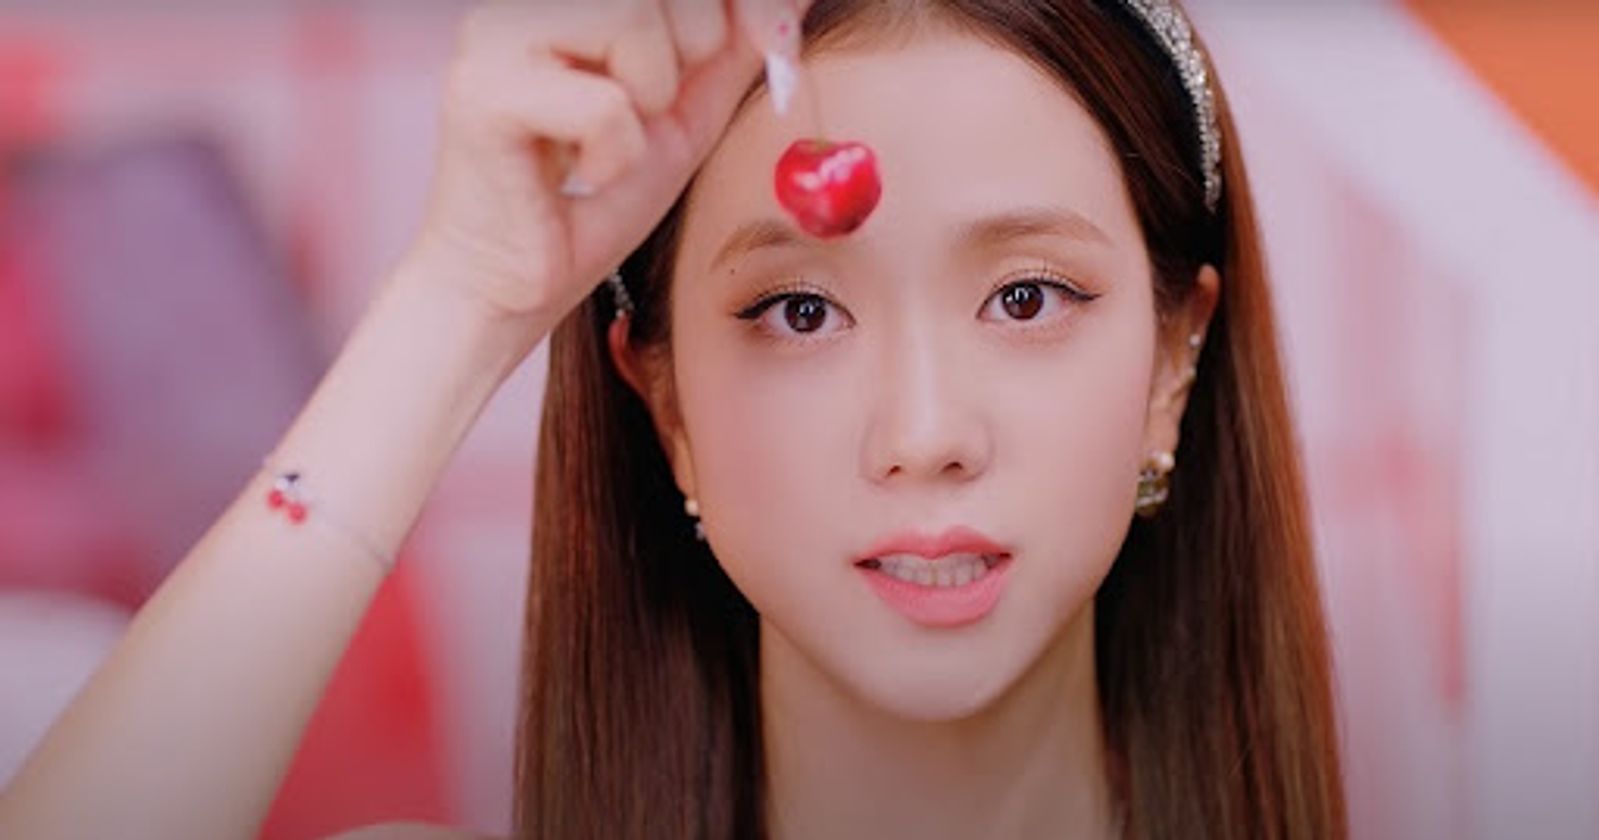 BLACKPINK's Jisoo shares her skincare routine for her ethereal glowing skin